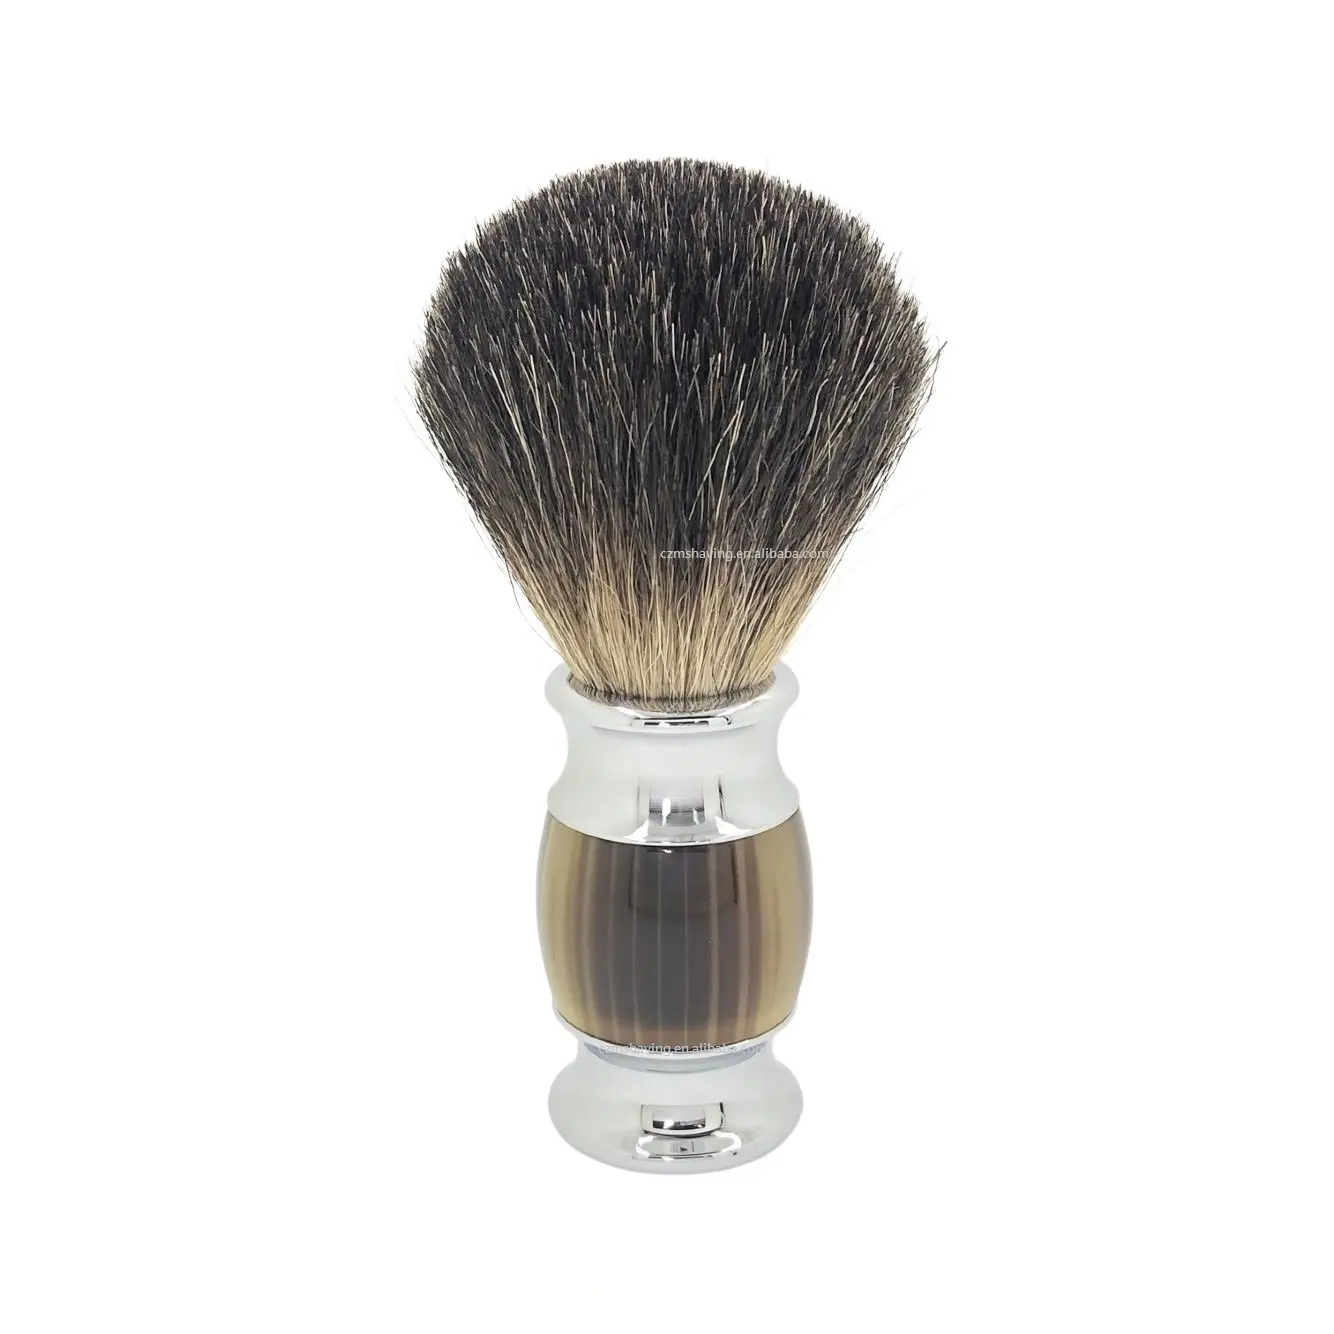 Bulk Order Hot Sales Black Badger Hair Knots Shaving Brush Faux Ox Horn Resin And Chrome Metal Handle Brown Ready To Ship